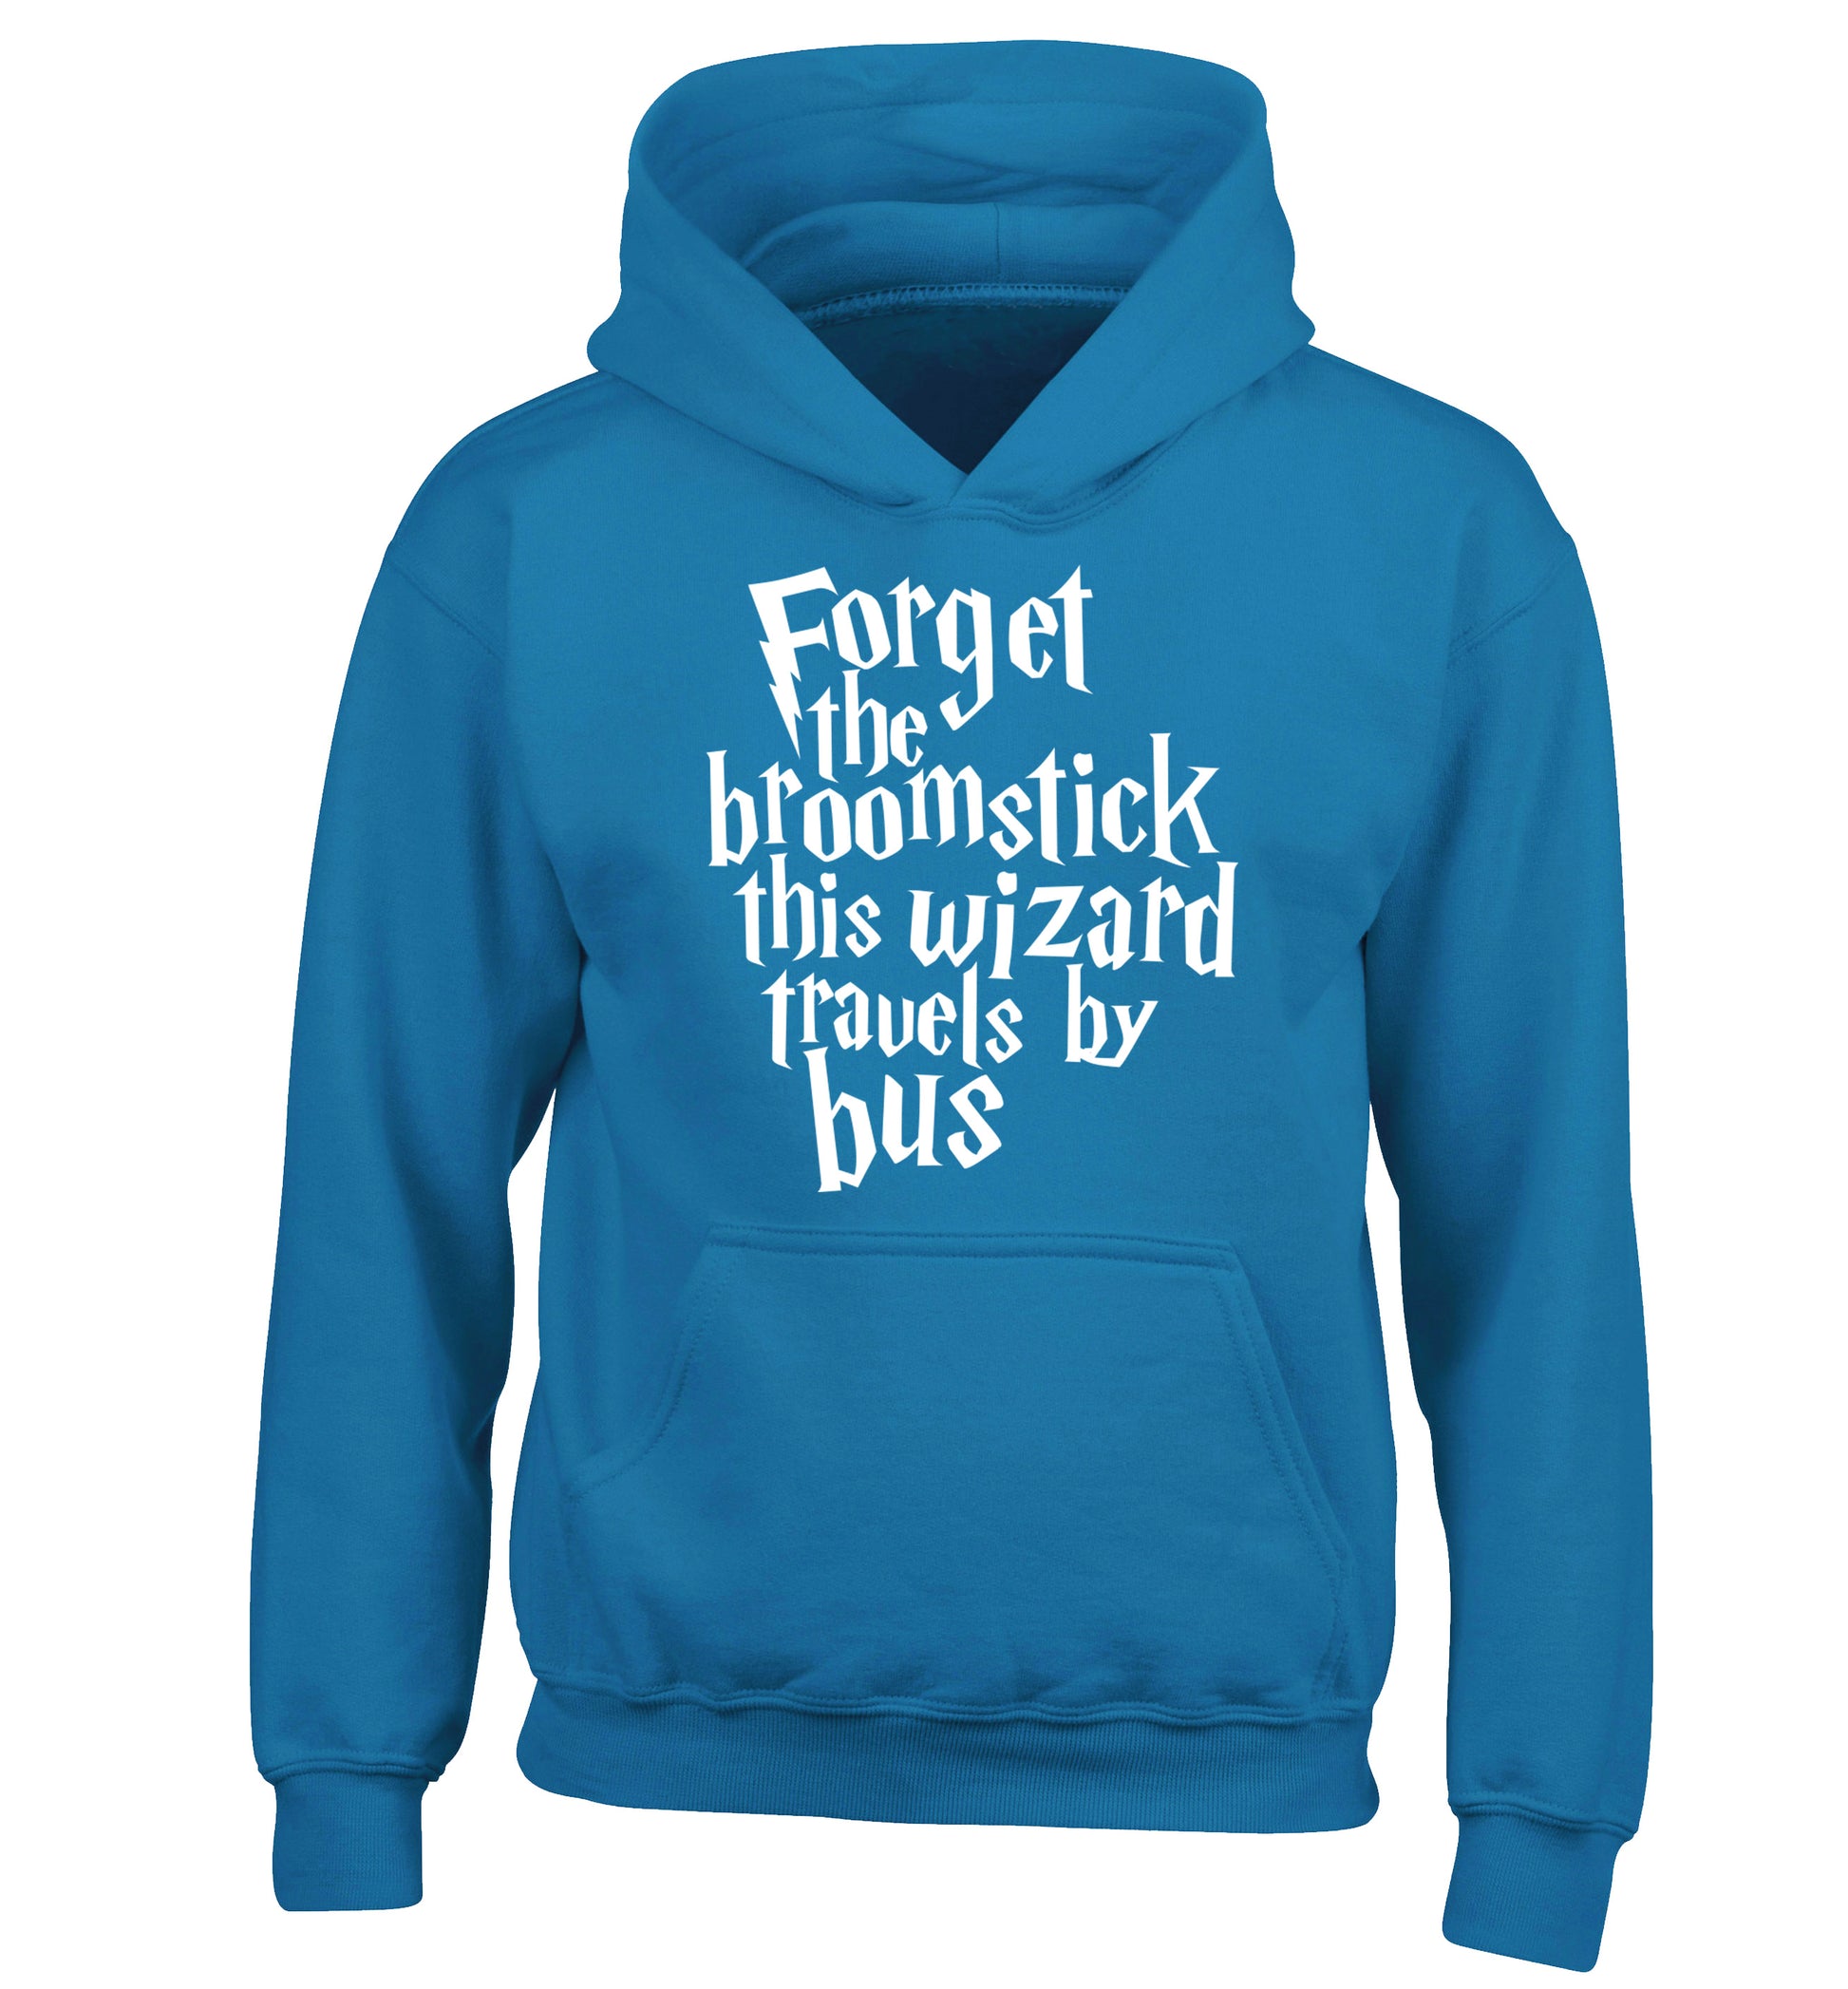 Forget the broomstick this wizard travels by bus children's blue hoodie 12-14 Years